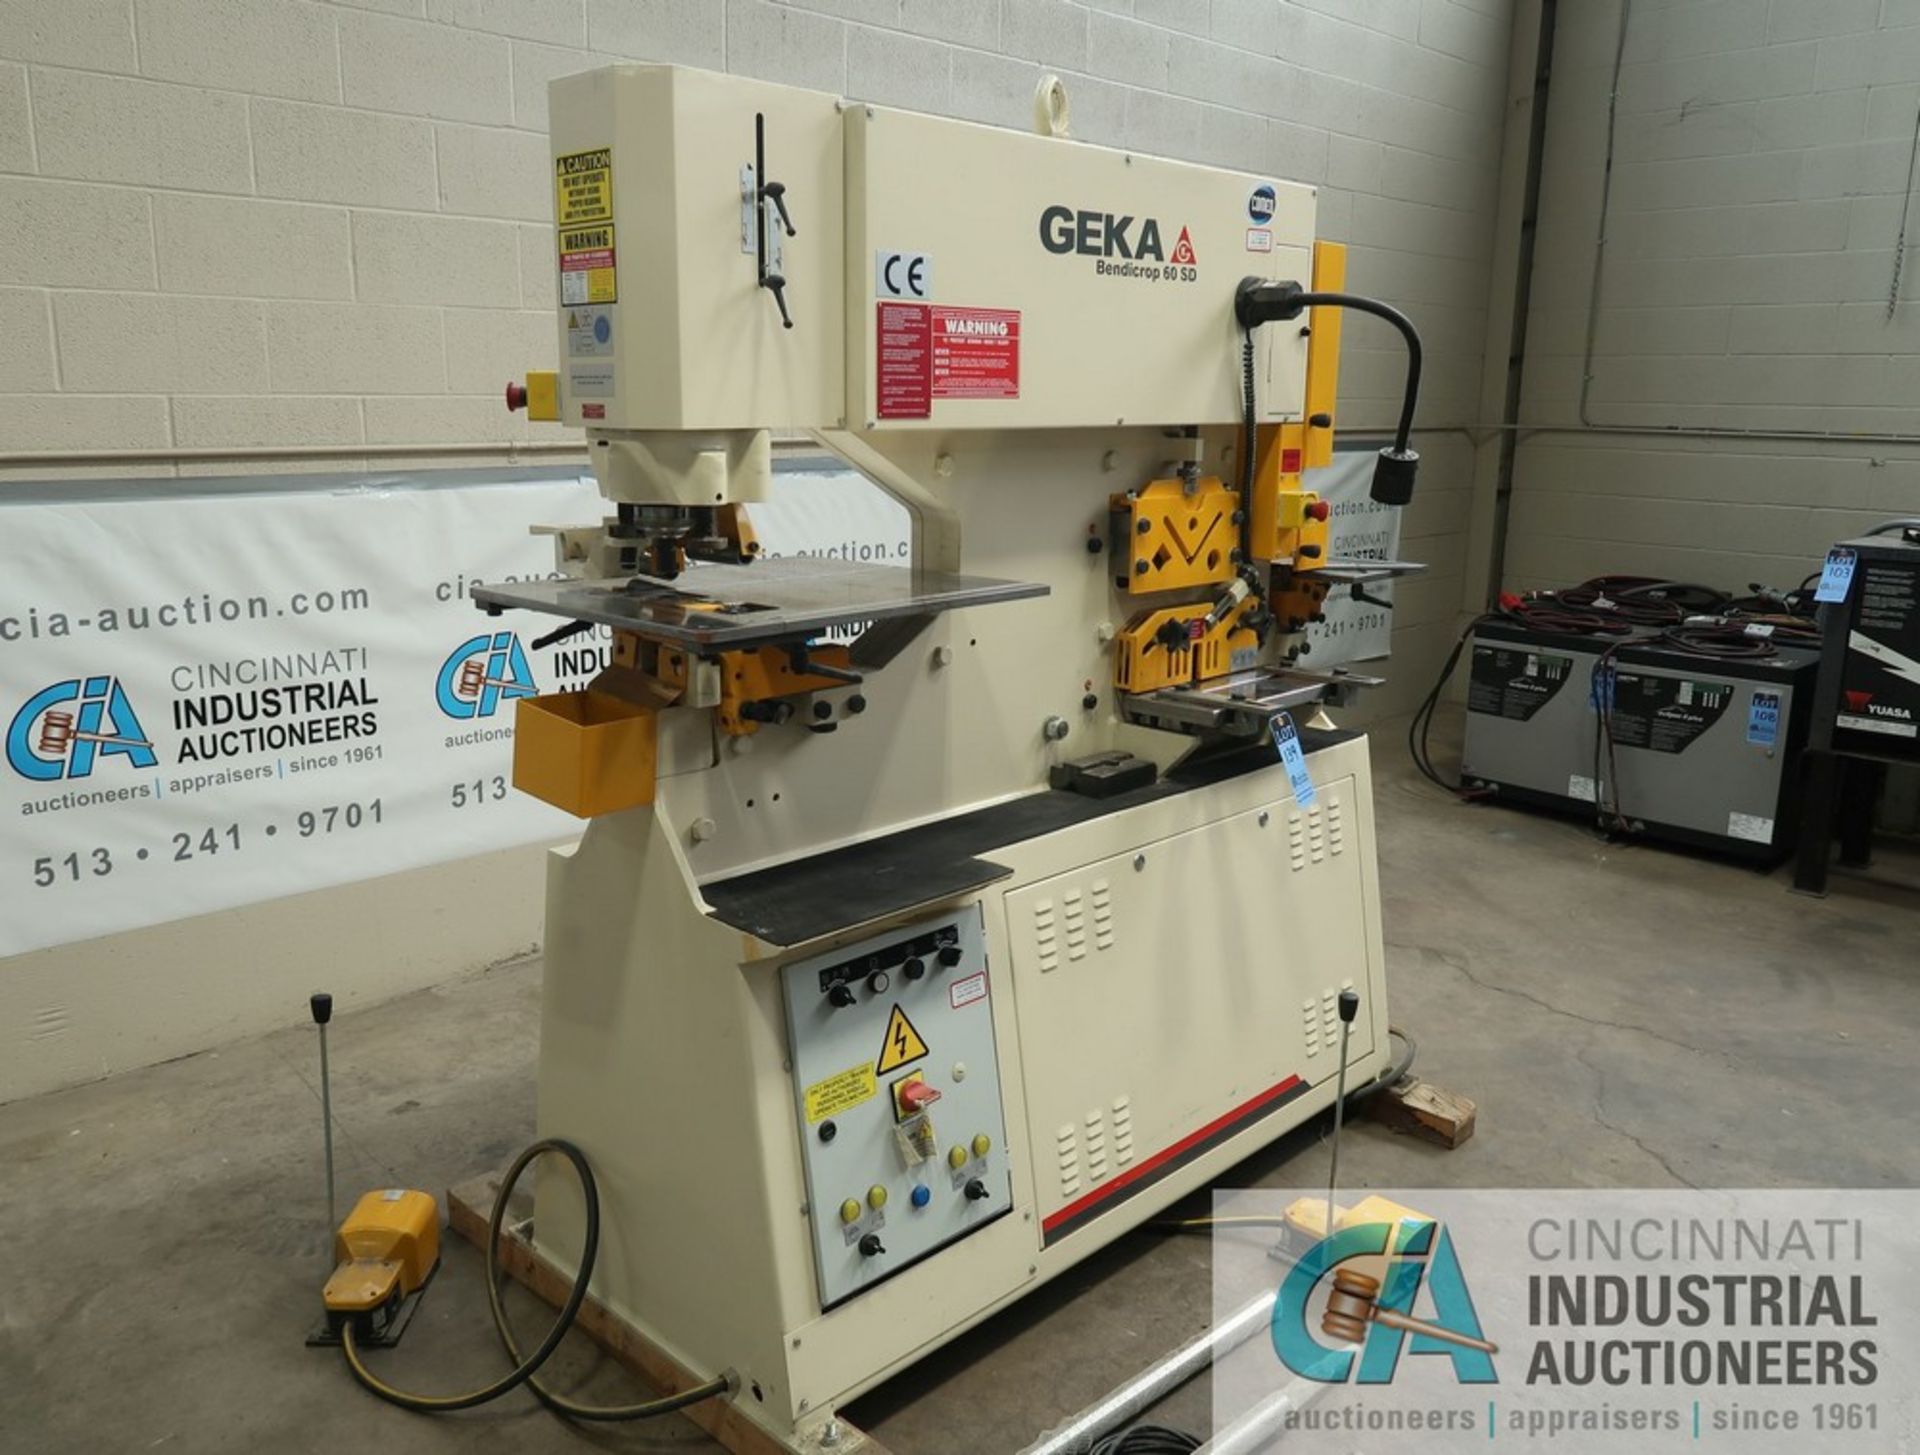 2017 GEKA MODEL BENDICROP 60SD HYDRAULIC IRONWORKER - New never put in service; S/N 168718 (NEW - Image 4 of 16